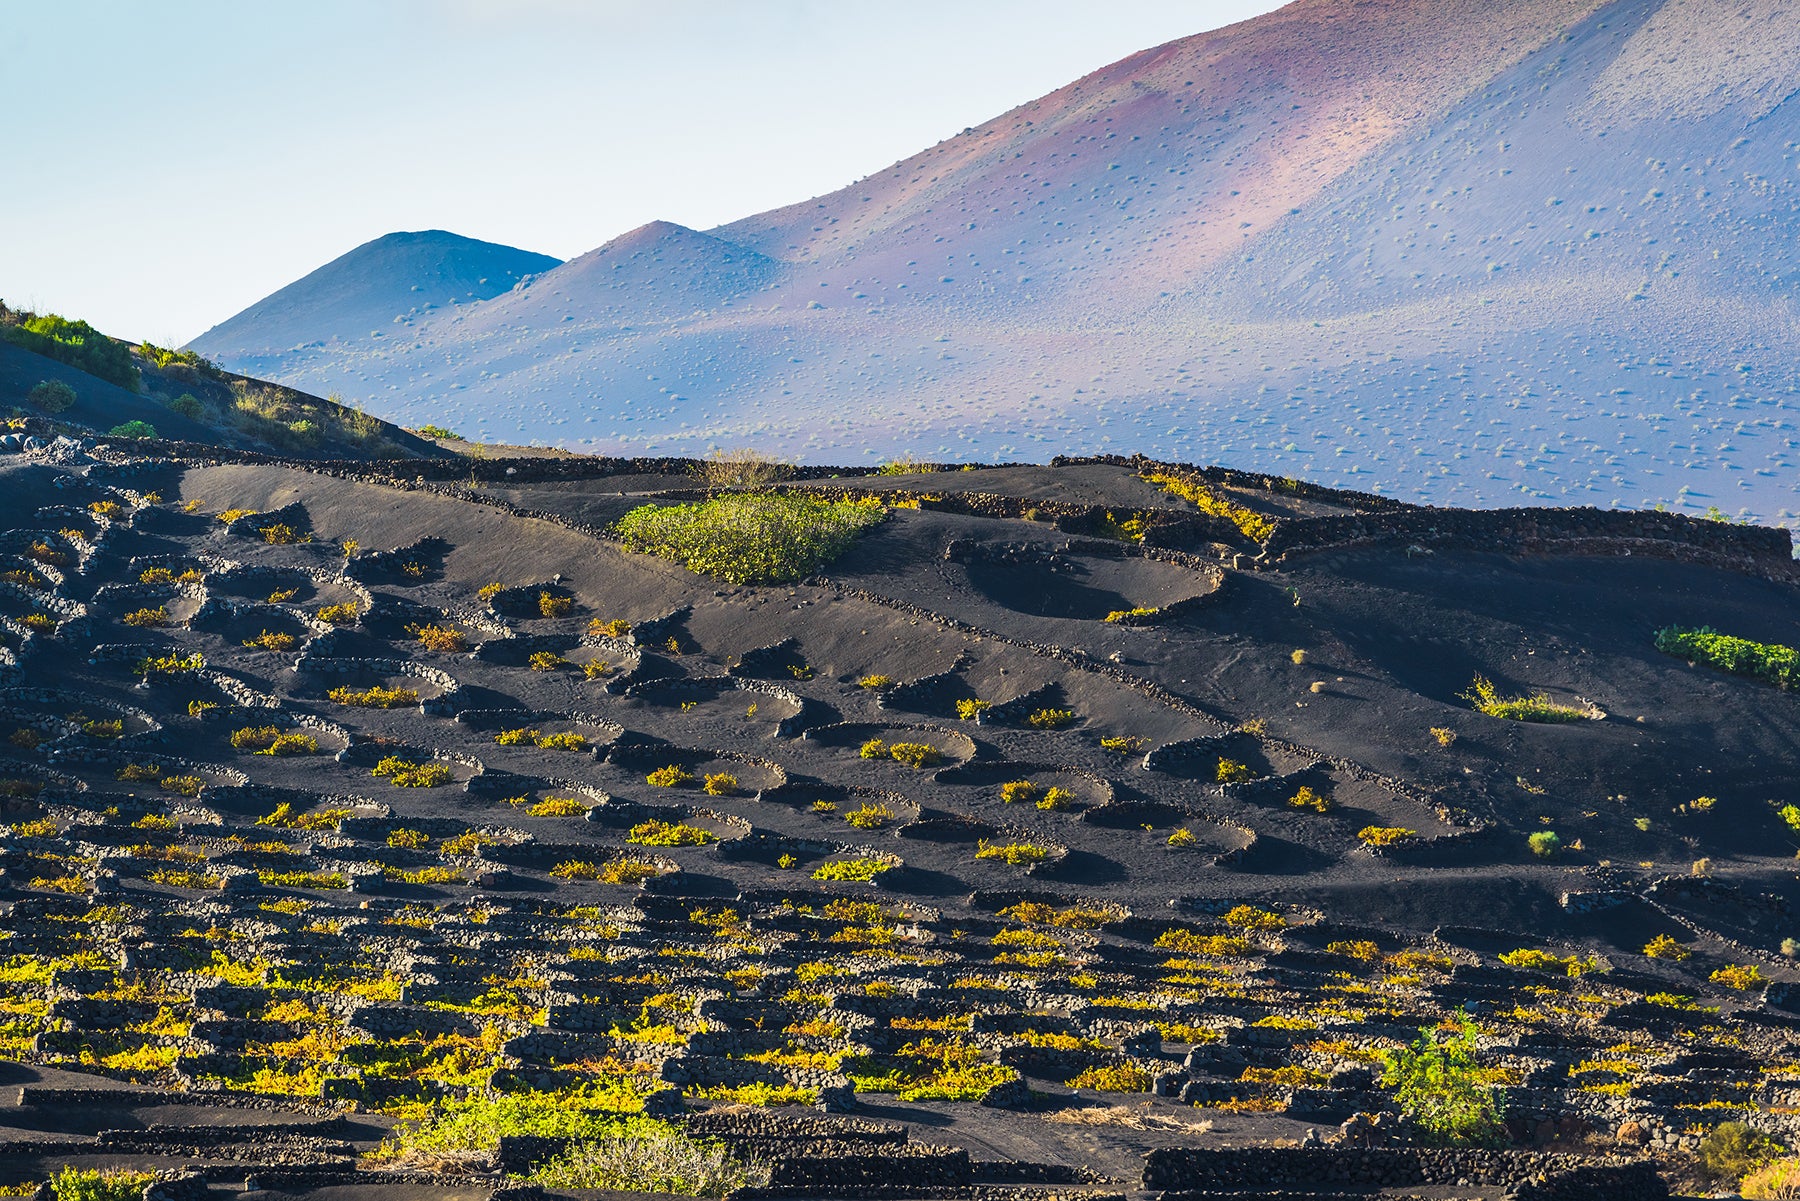 The unique, almost moon-like volcanic vineyards of Lanzarote